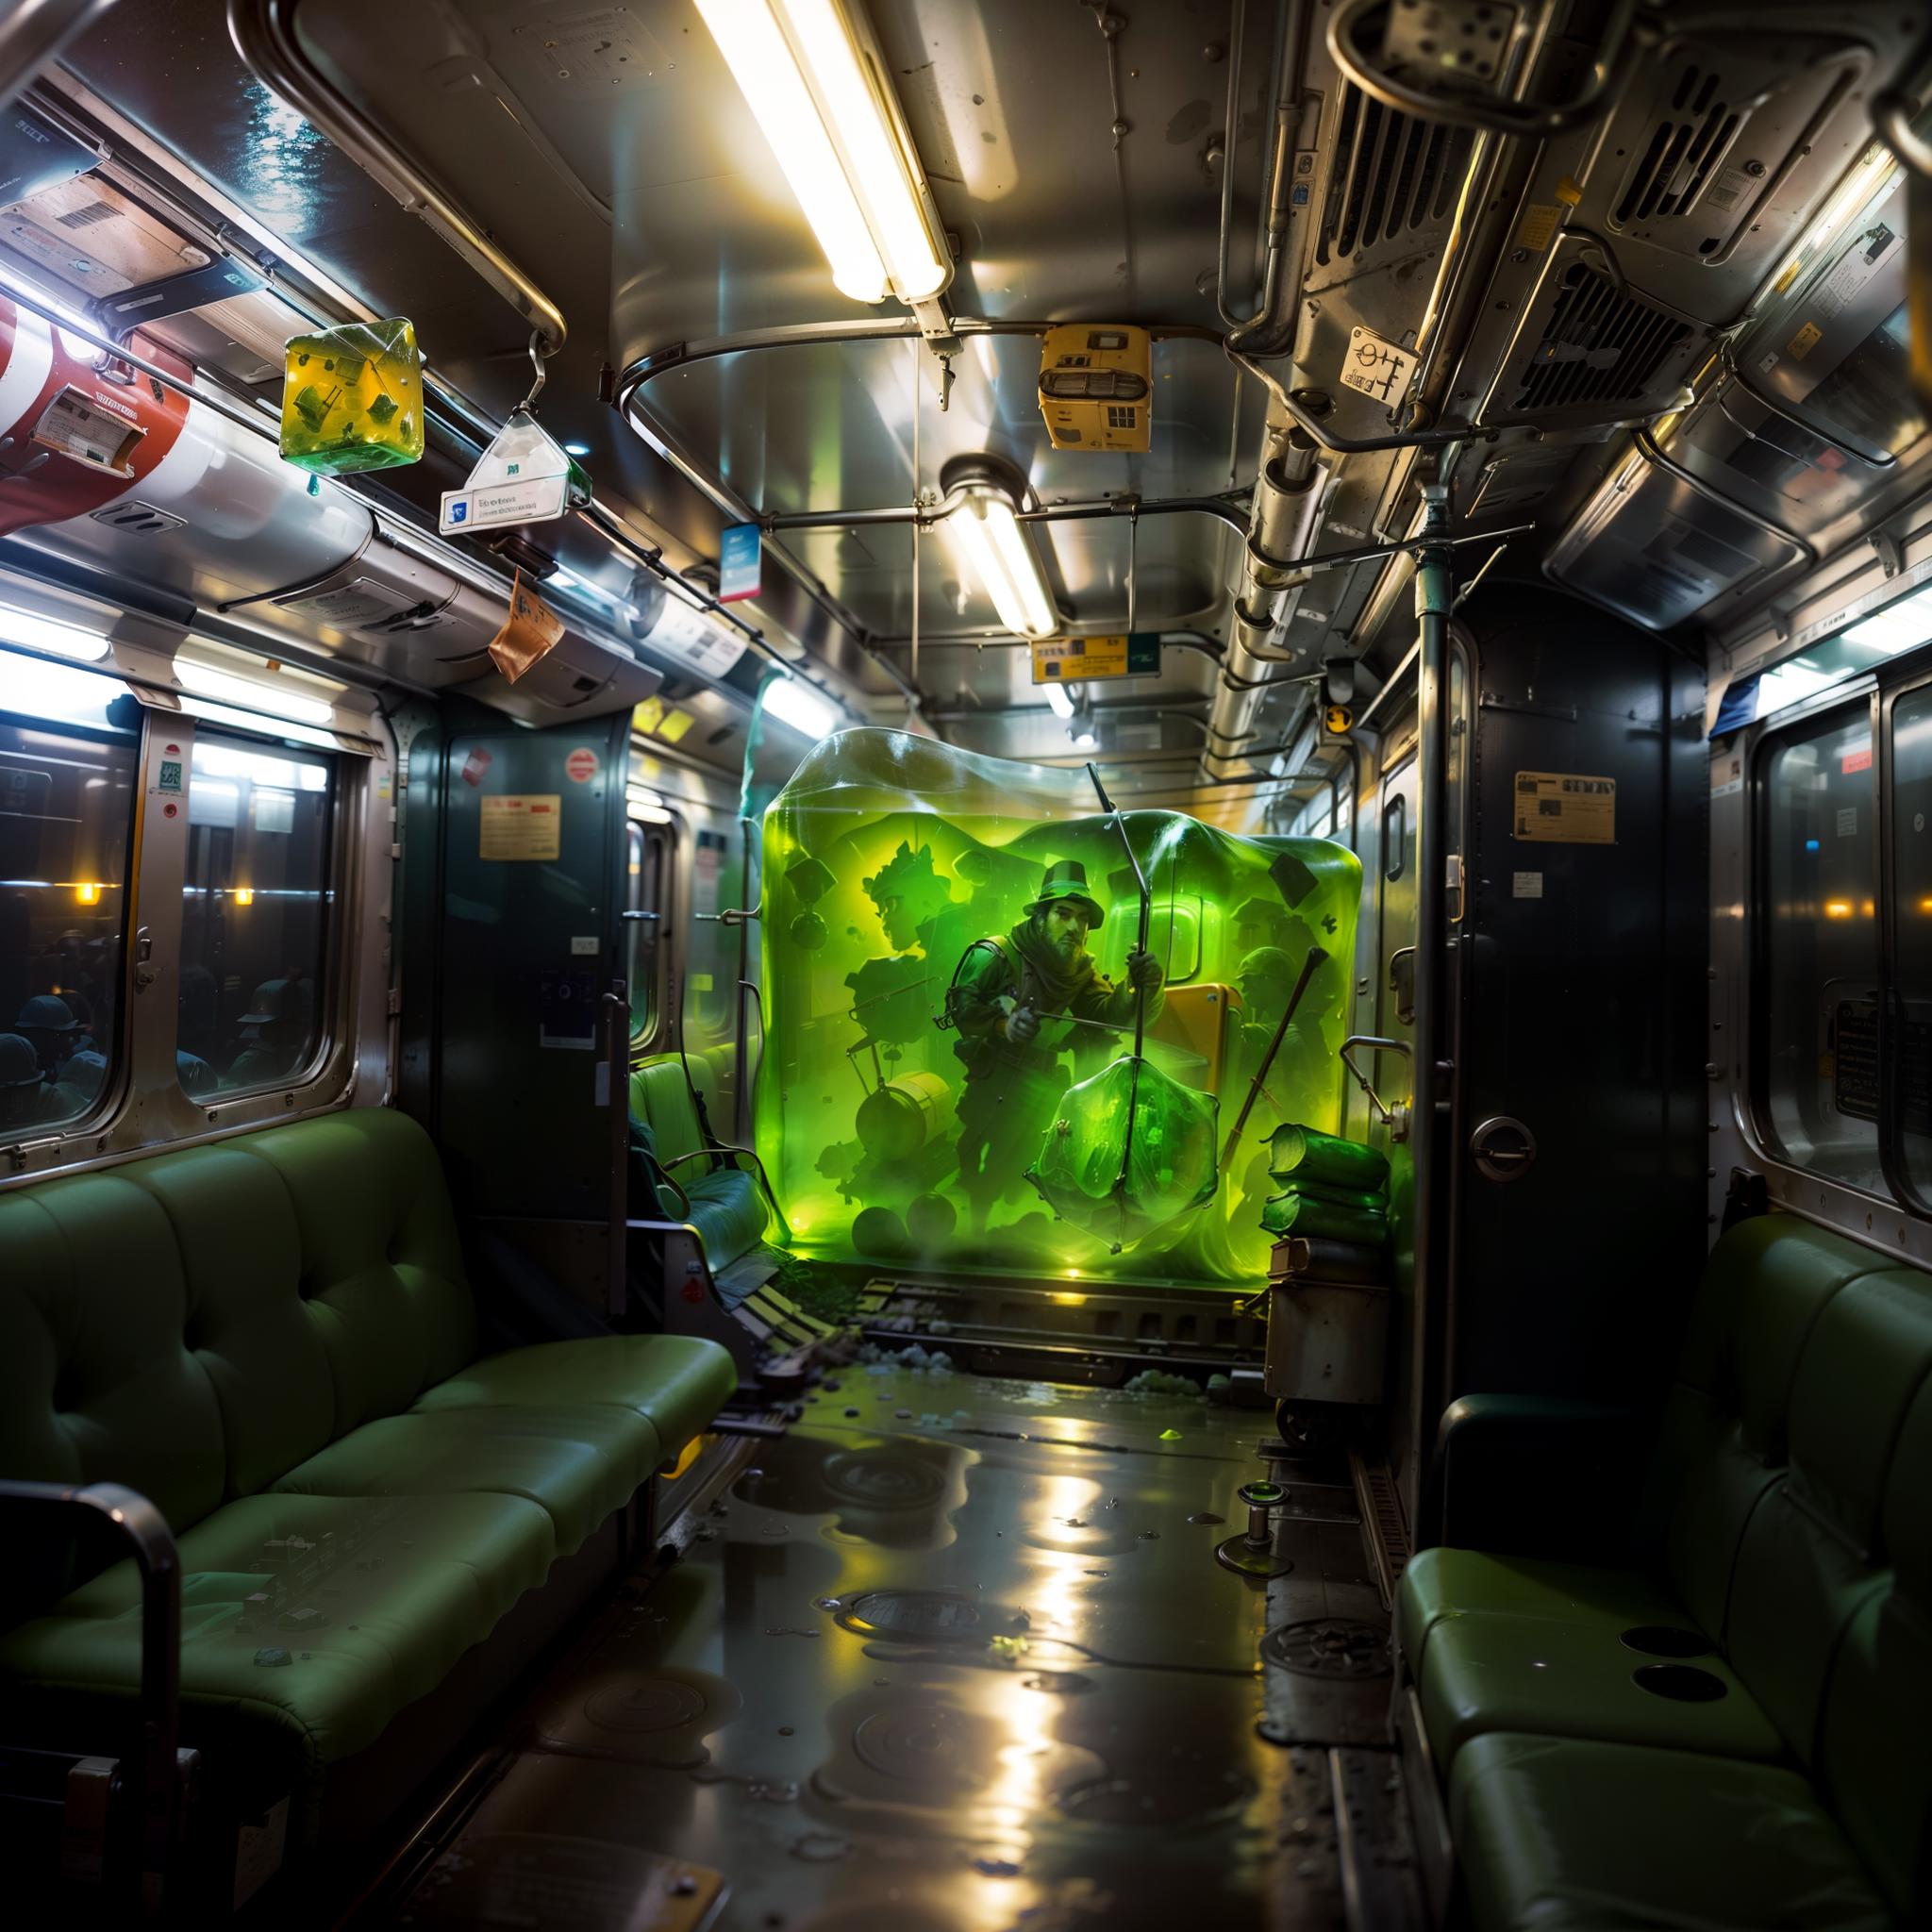 A person is standing in a subway train car with a green tarp in front of them.